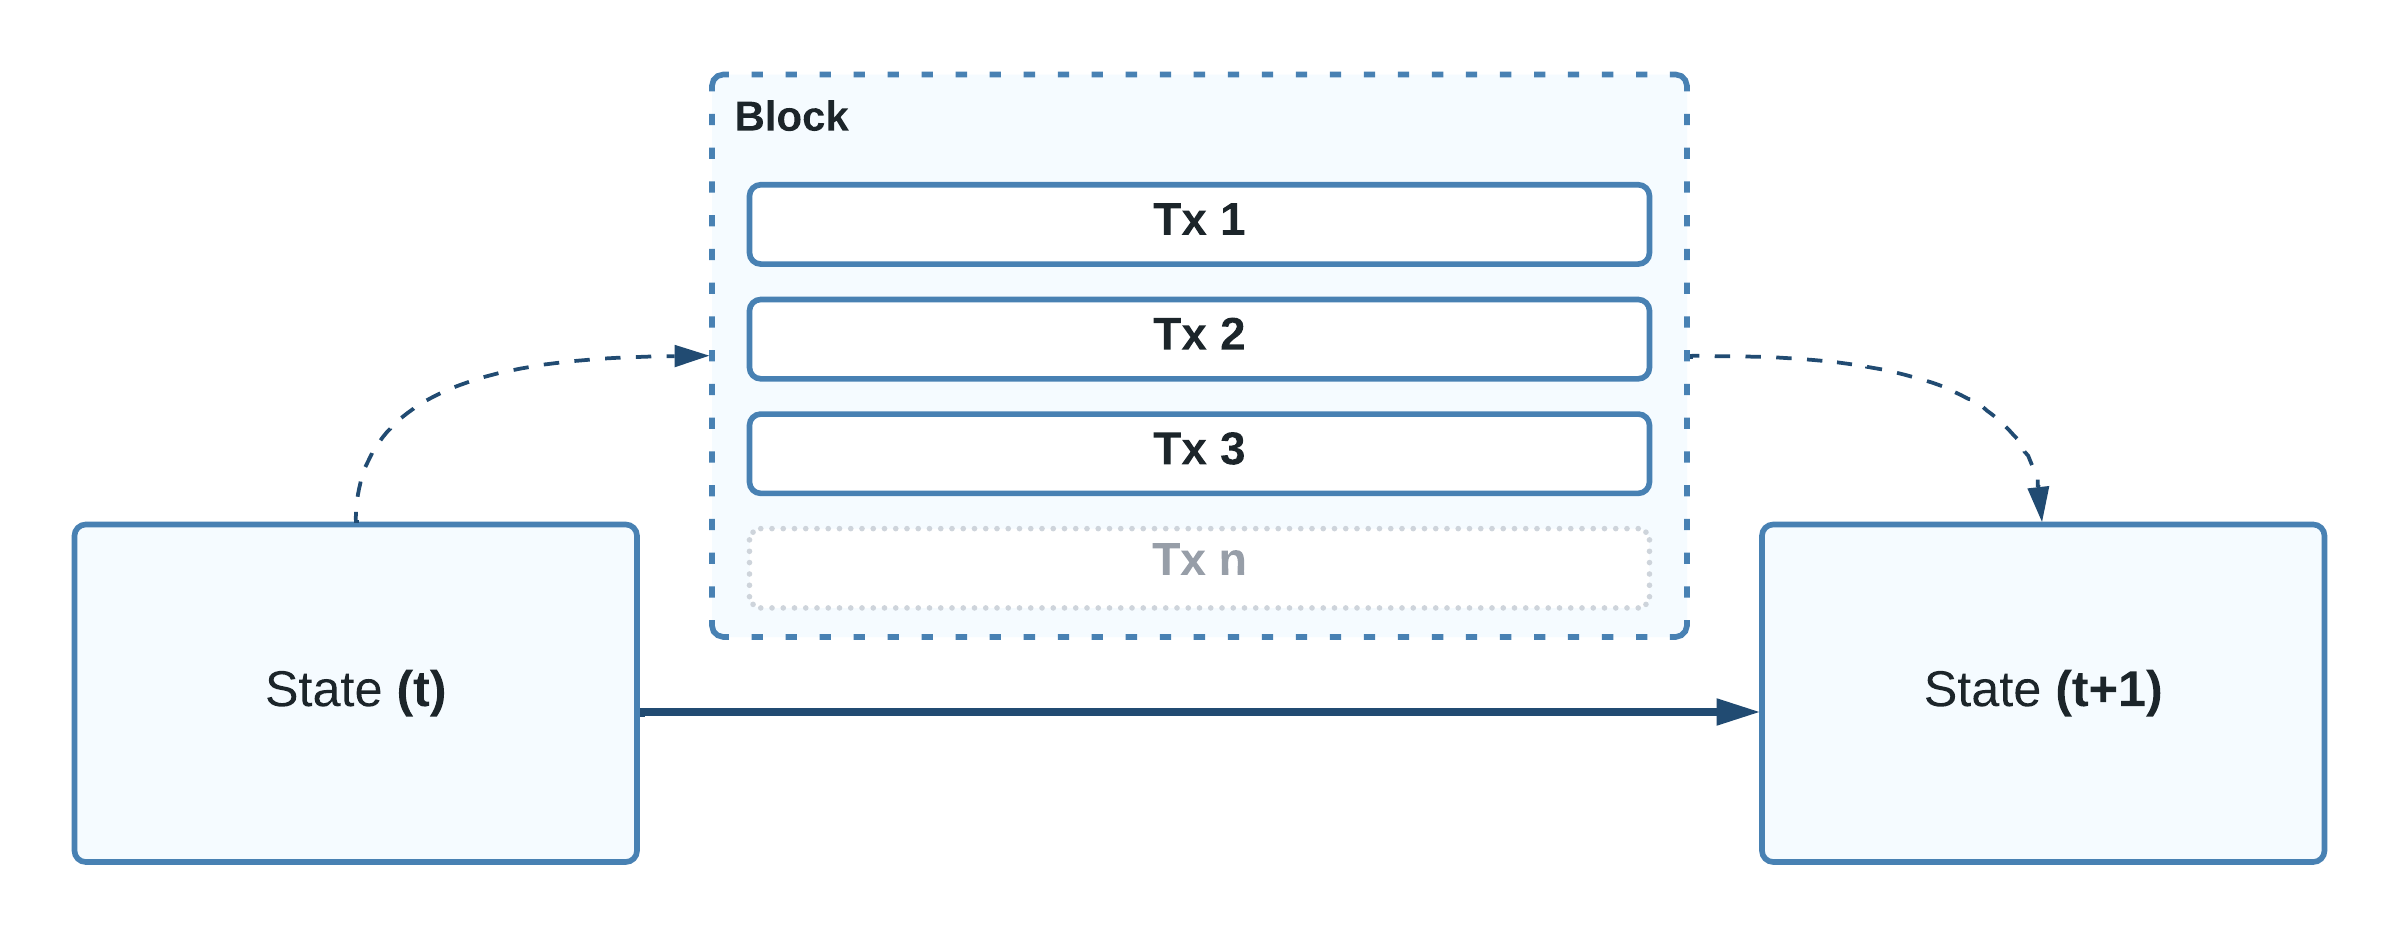 Adding a Block to the network leads to a state change